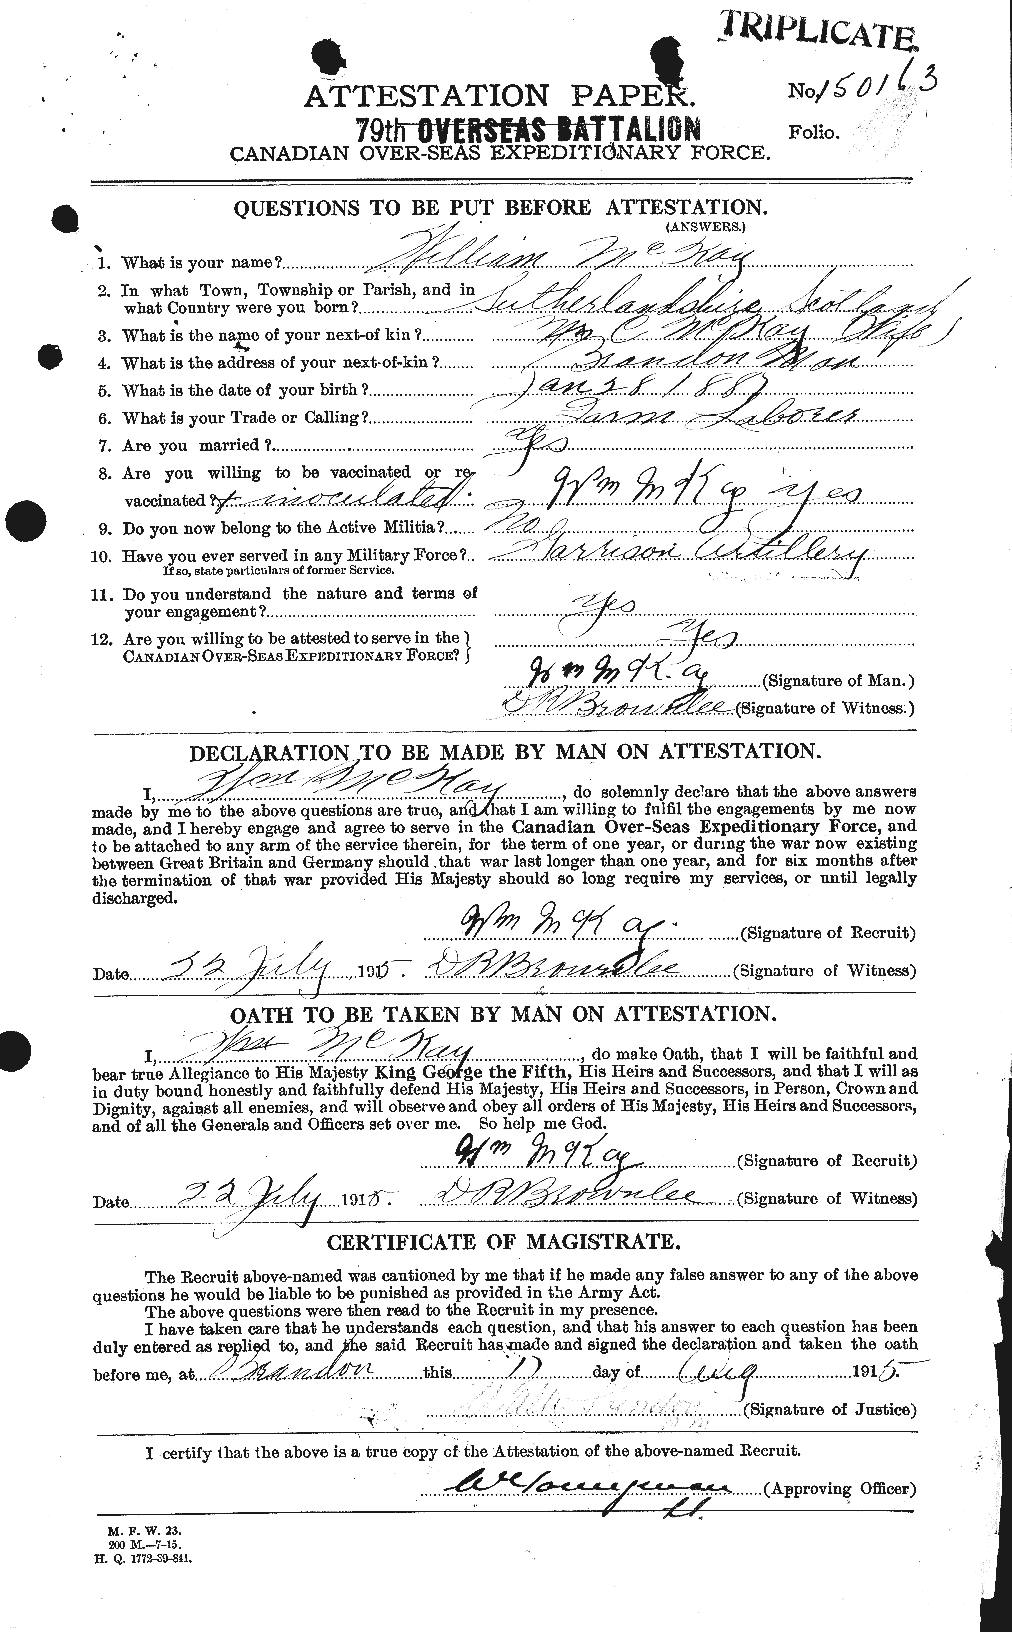 Personnel Records of the First World War - CEF 530220a